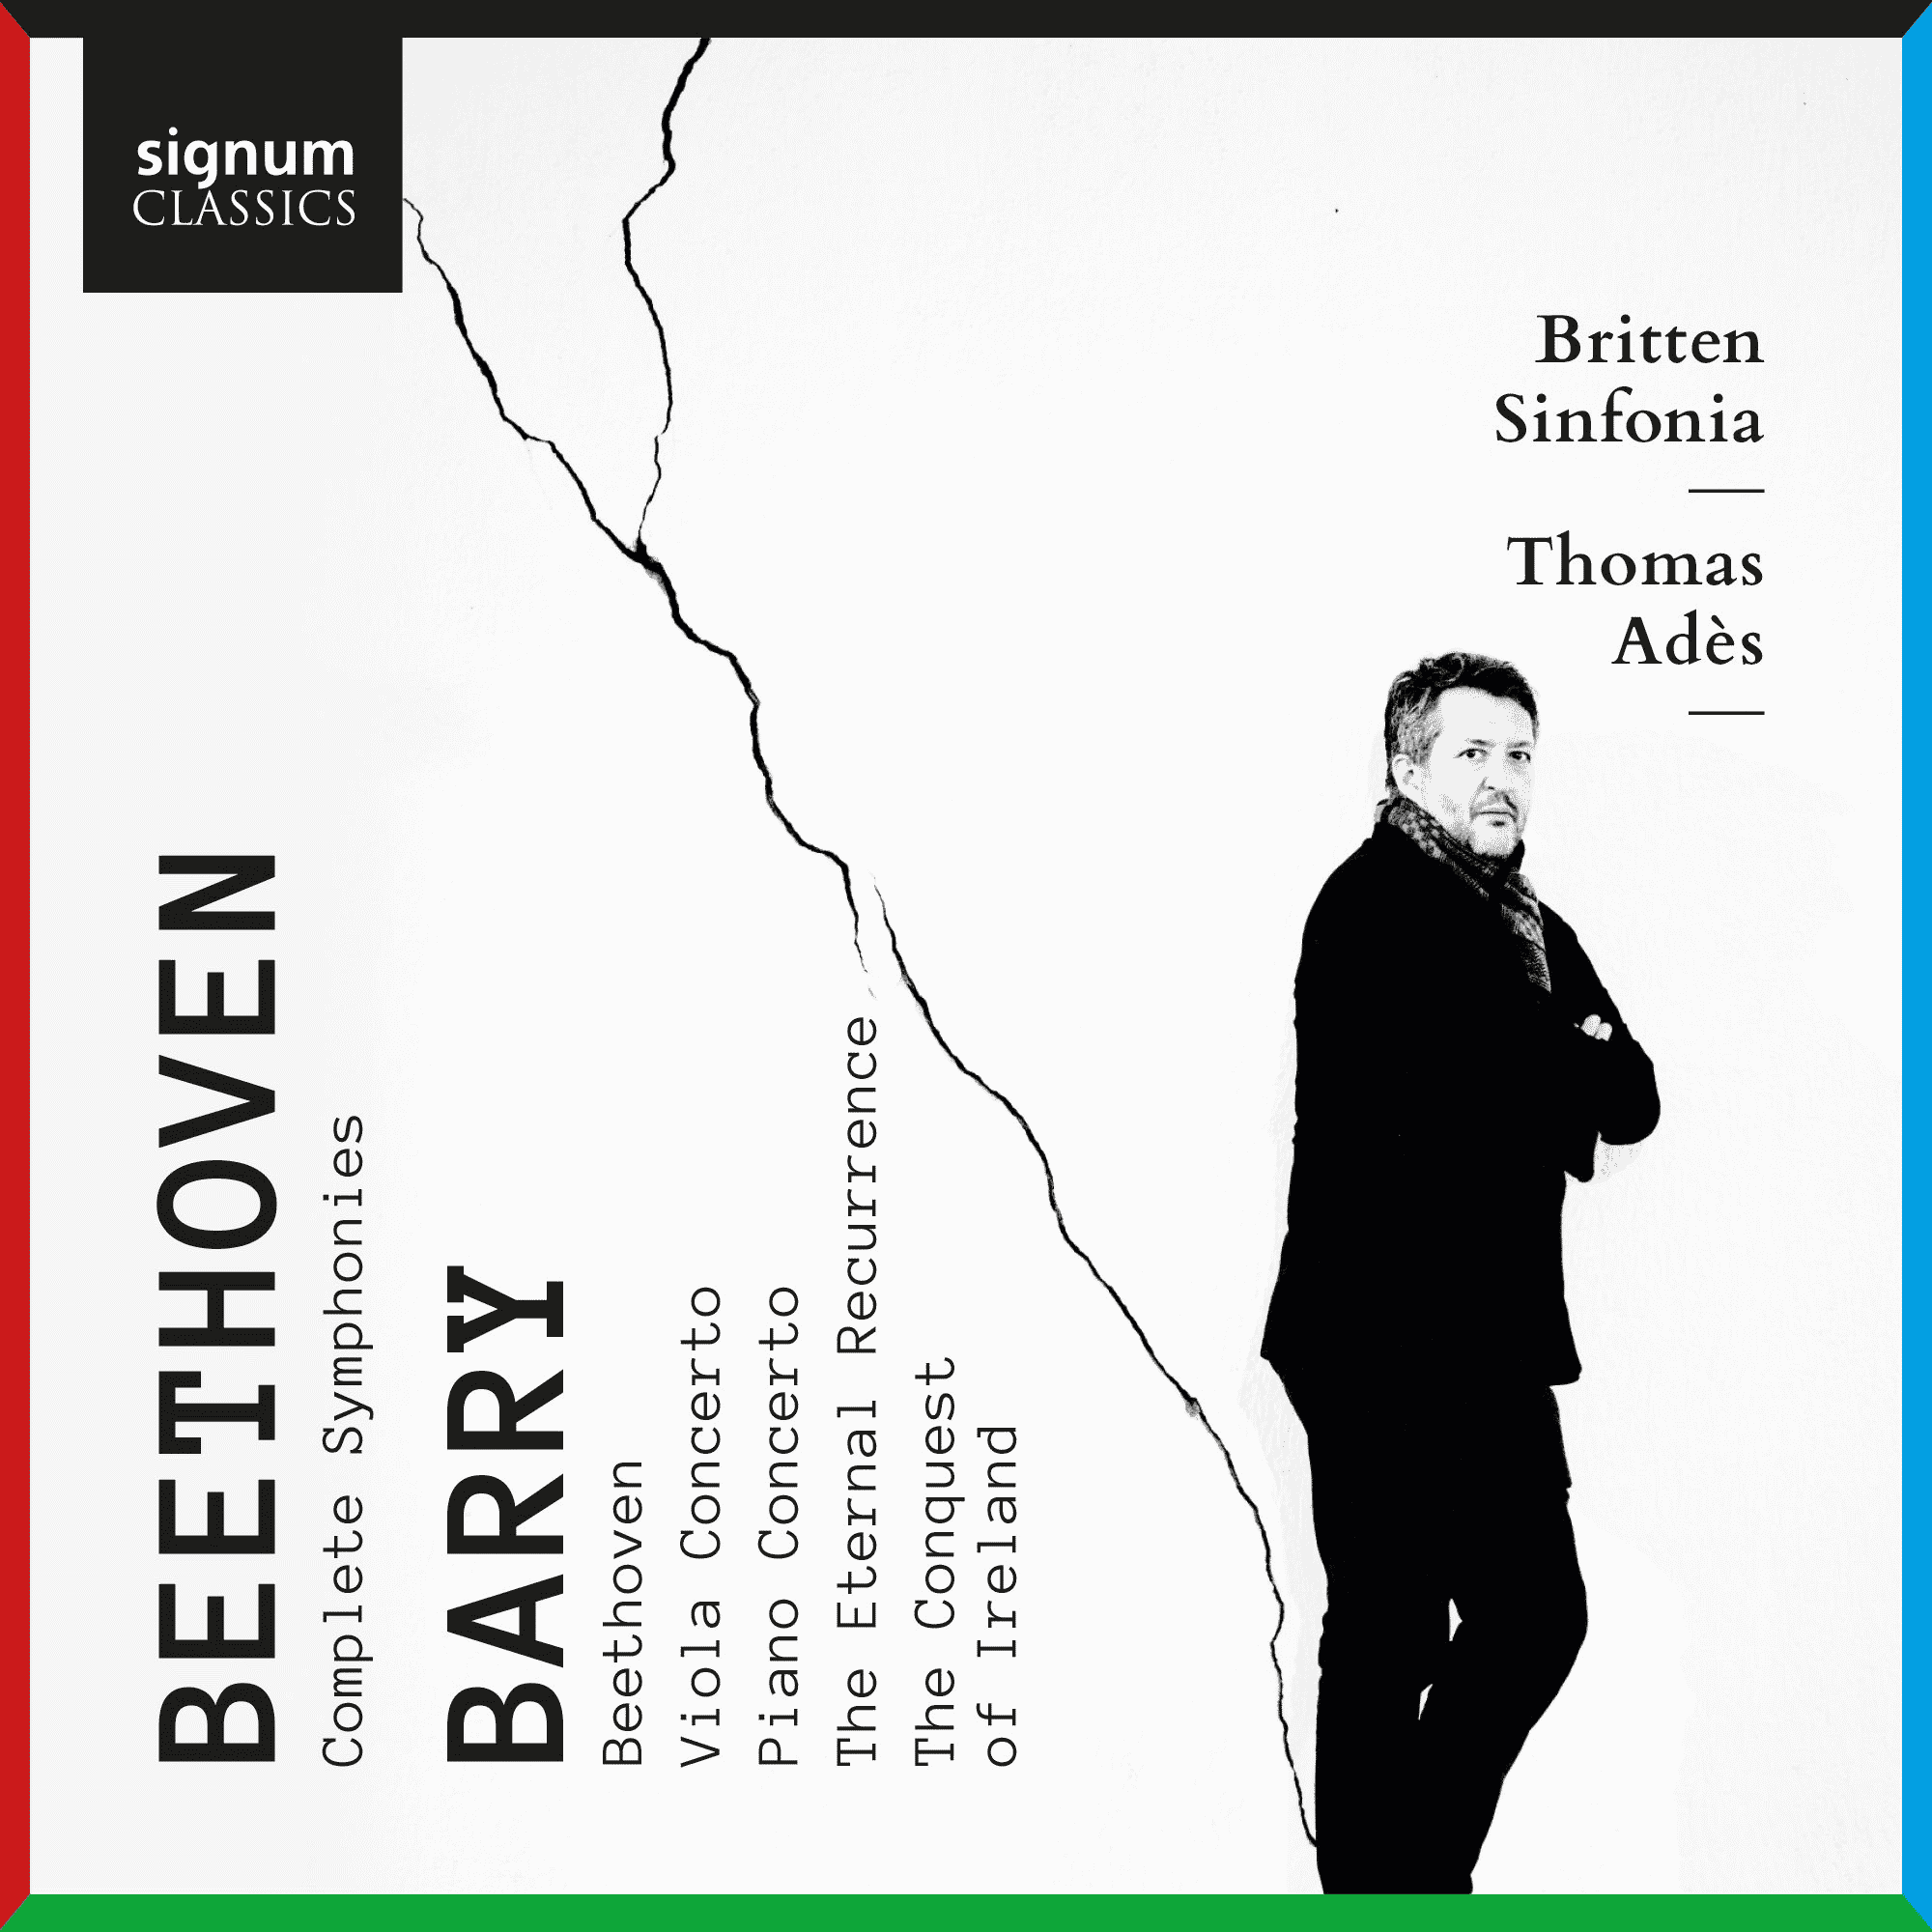 The next Beethoven symphony box comes from Britten